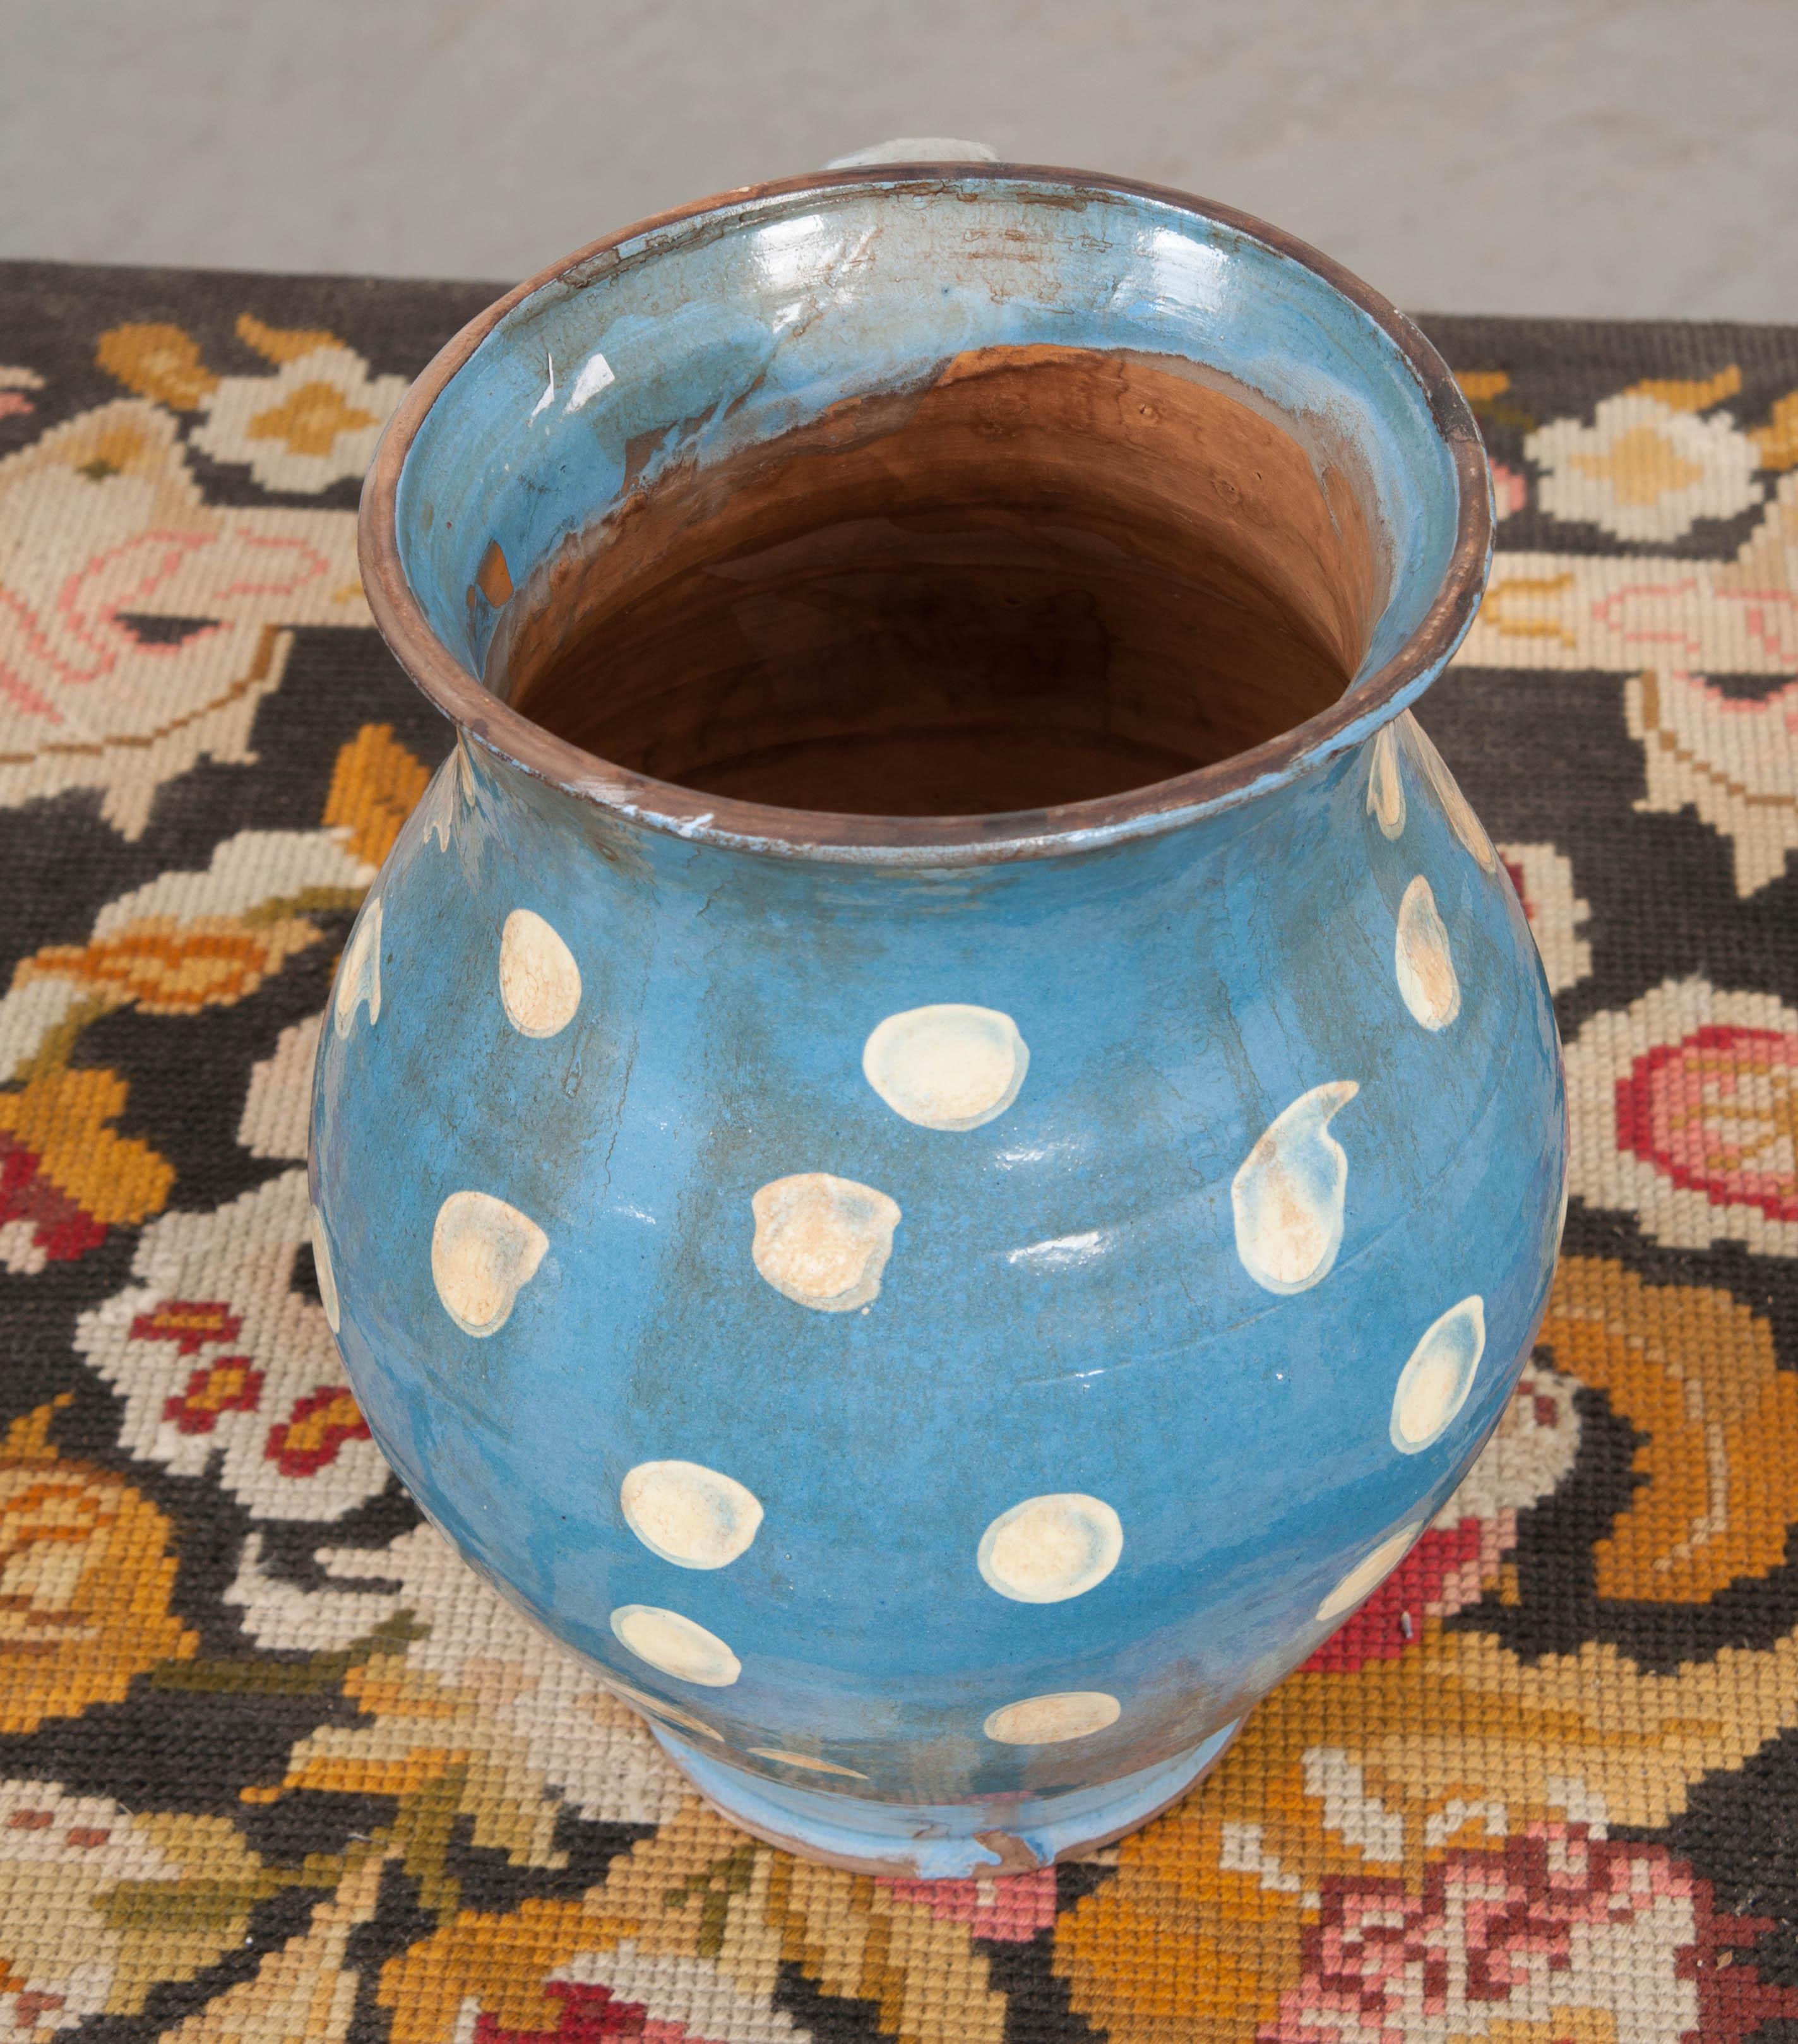 This charming French vintage glazed terracotta pitcher has been glazed in a fantastic steel-blue, with buttermilk-colored polka-dots providing a fun and colorful design. It was handmade and hand painted, making it a sweet work of art!